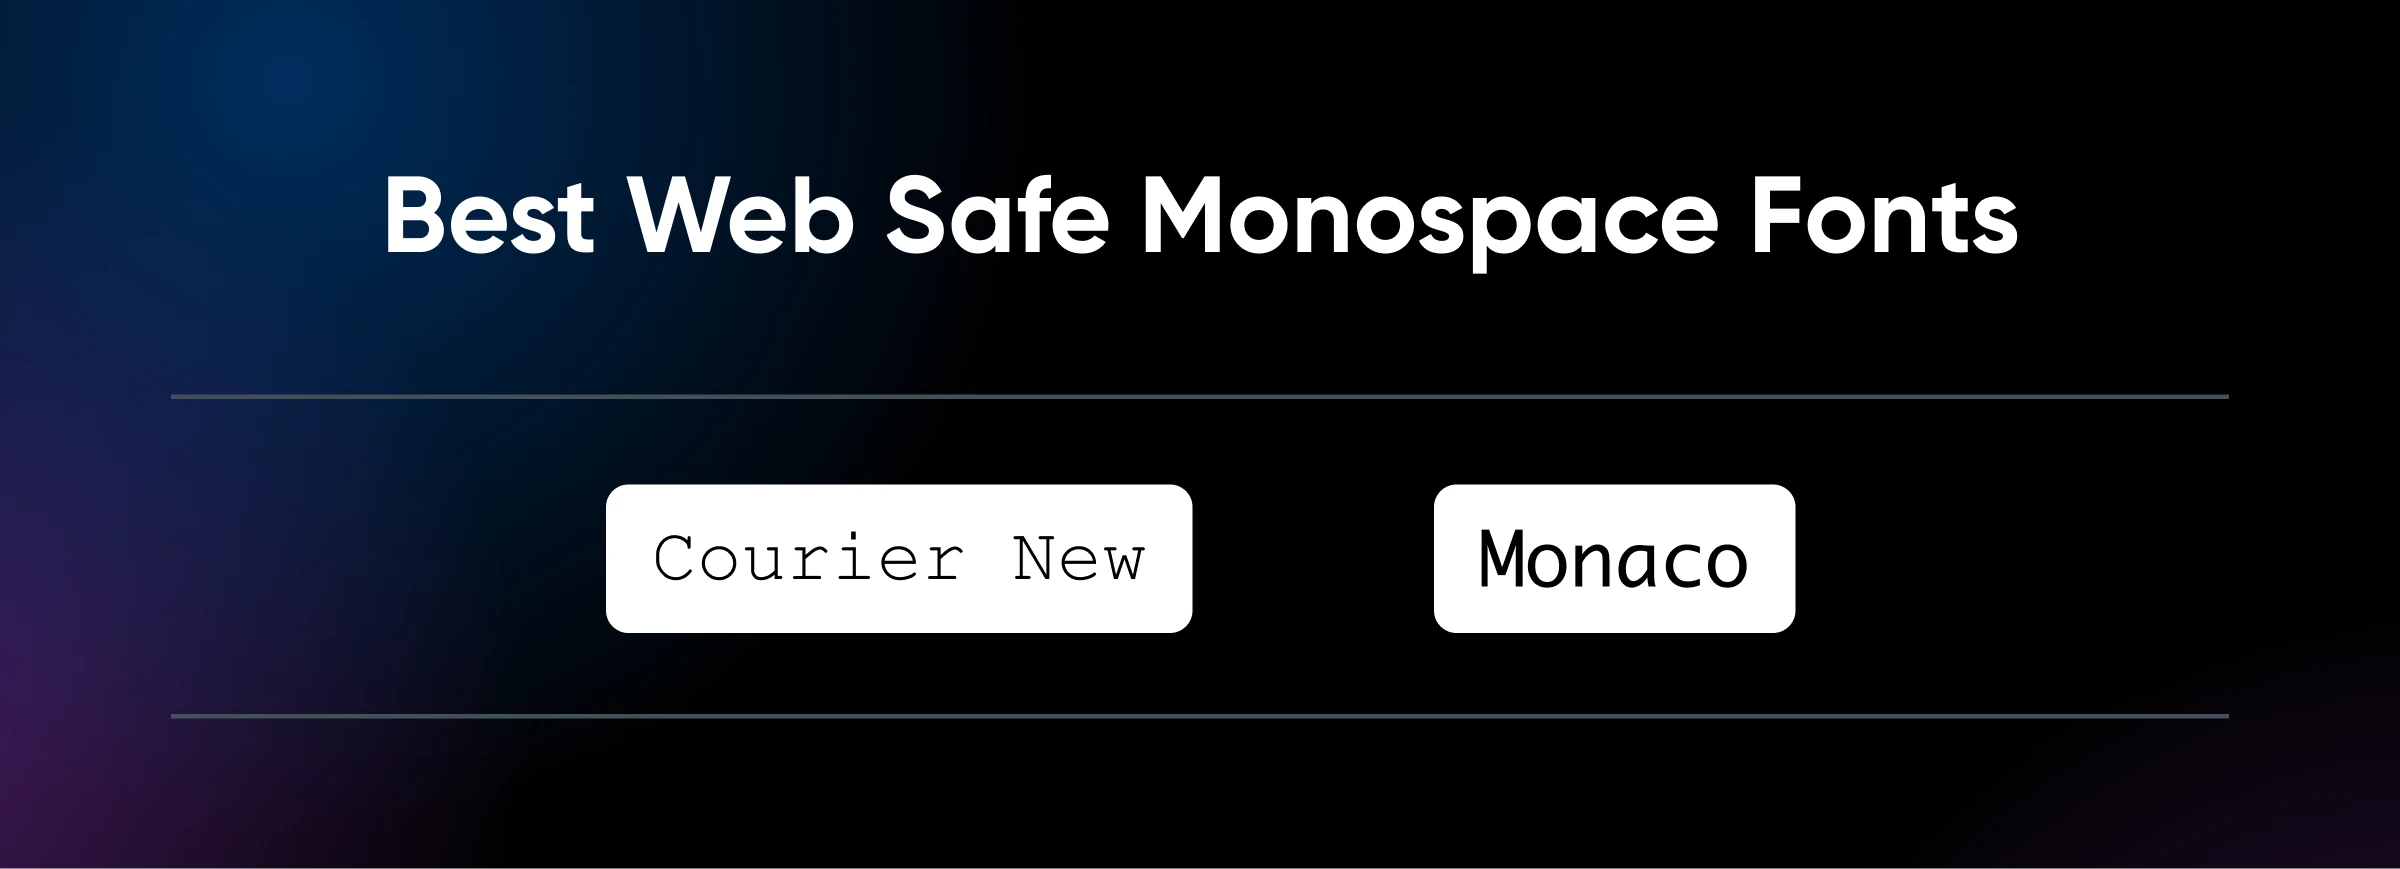 Infographic of best web safe monospace fonts: Courier New and Monaco. Dark gradient background with white text.